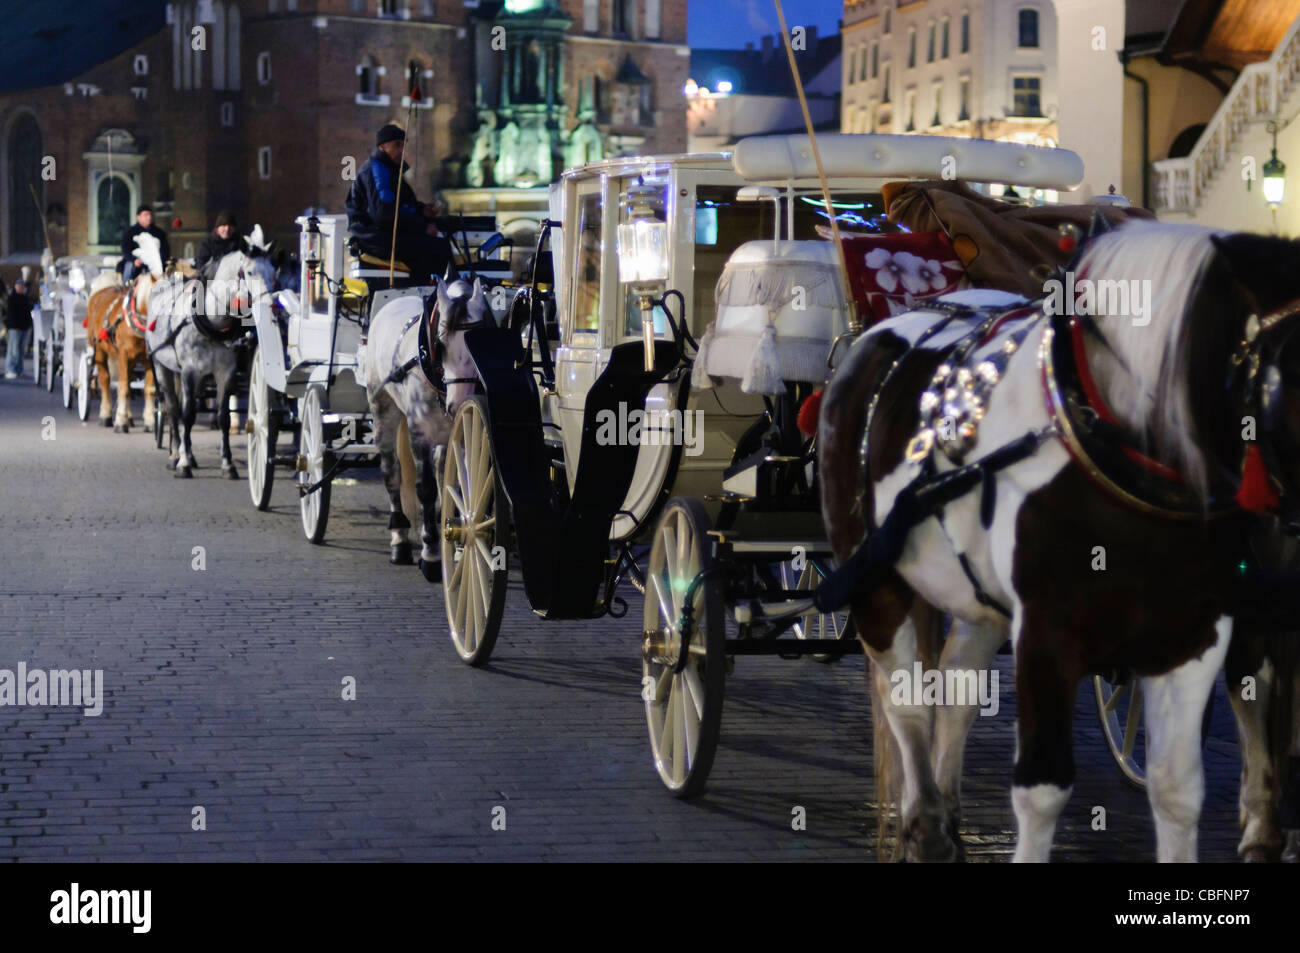 Horse drawn tour tourist carriages line up at night in Rynek Glowny, Krakow Stock Photo